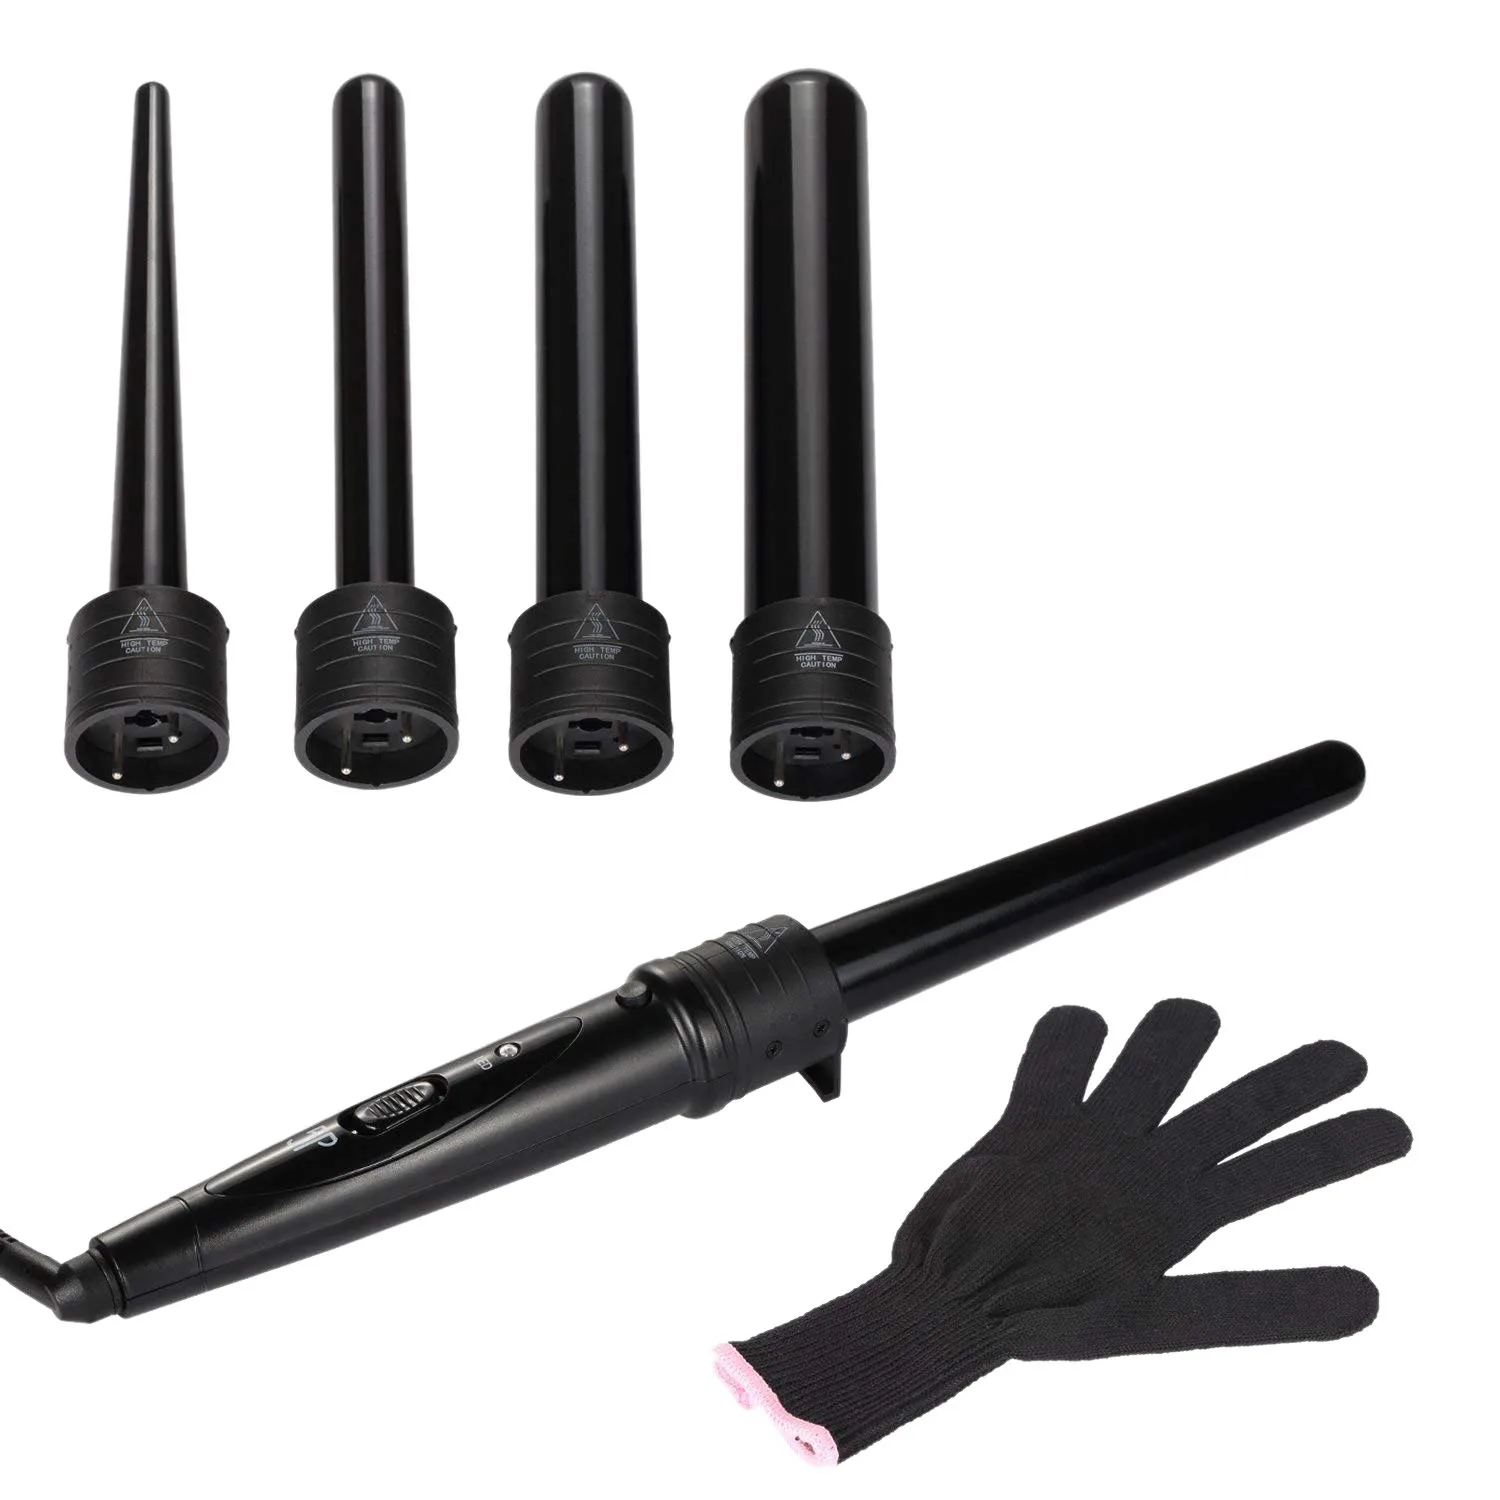 

Hot sale 5-in-1 Hair Curler Curling Wand Set Curling Tongs Curling Iron with 5 Interchangeable Barrels and Heat Resistant Glov